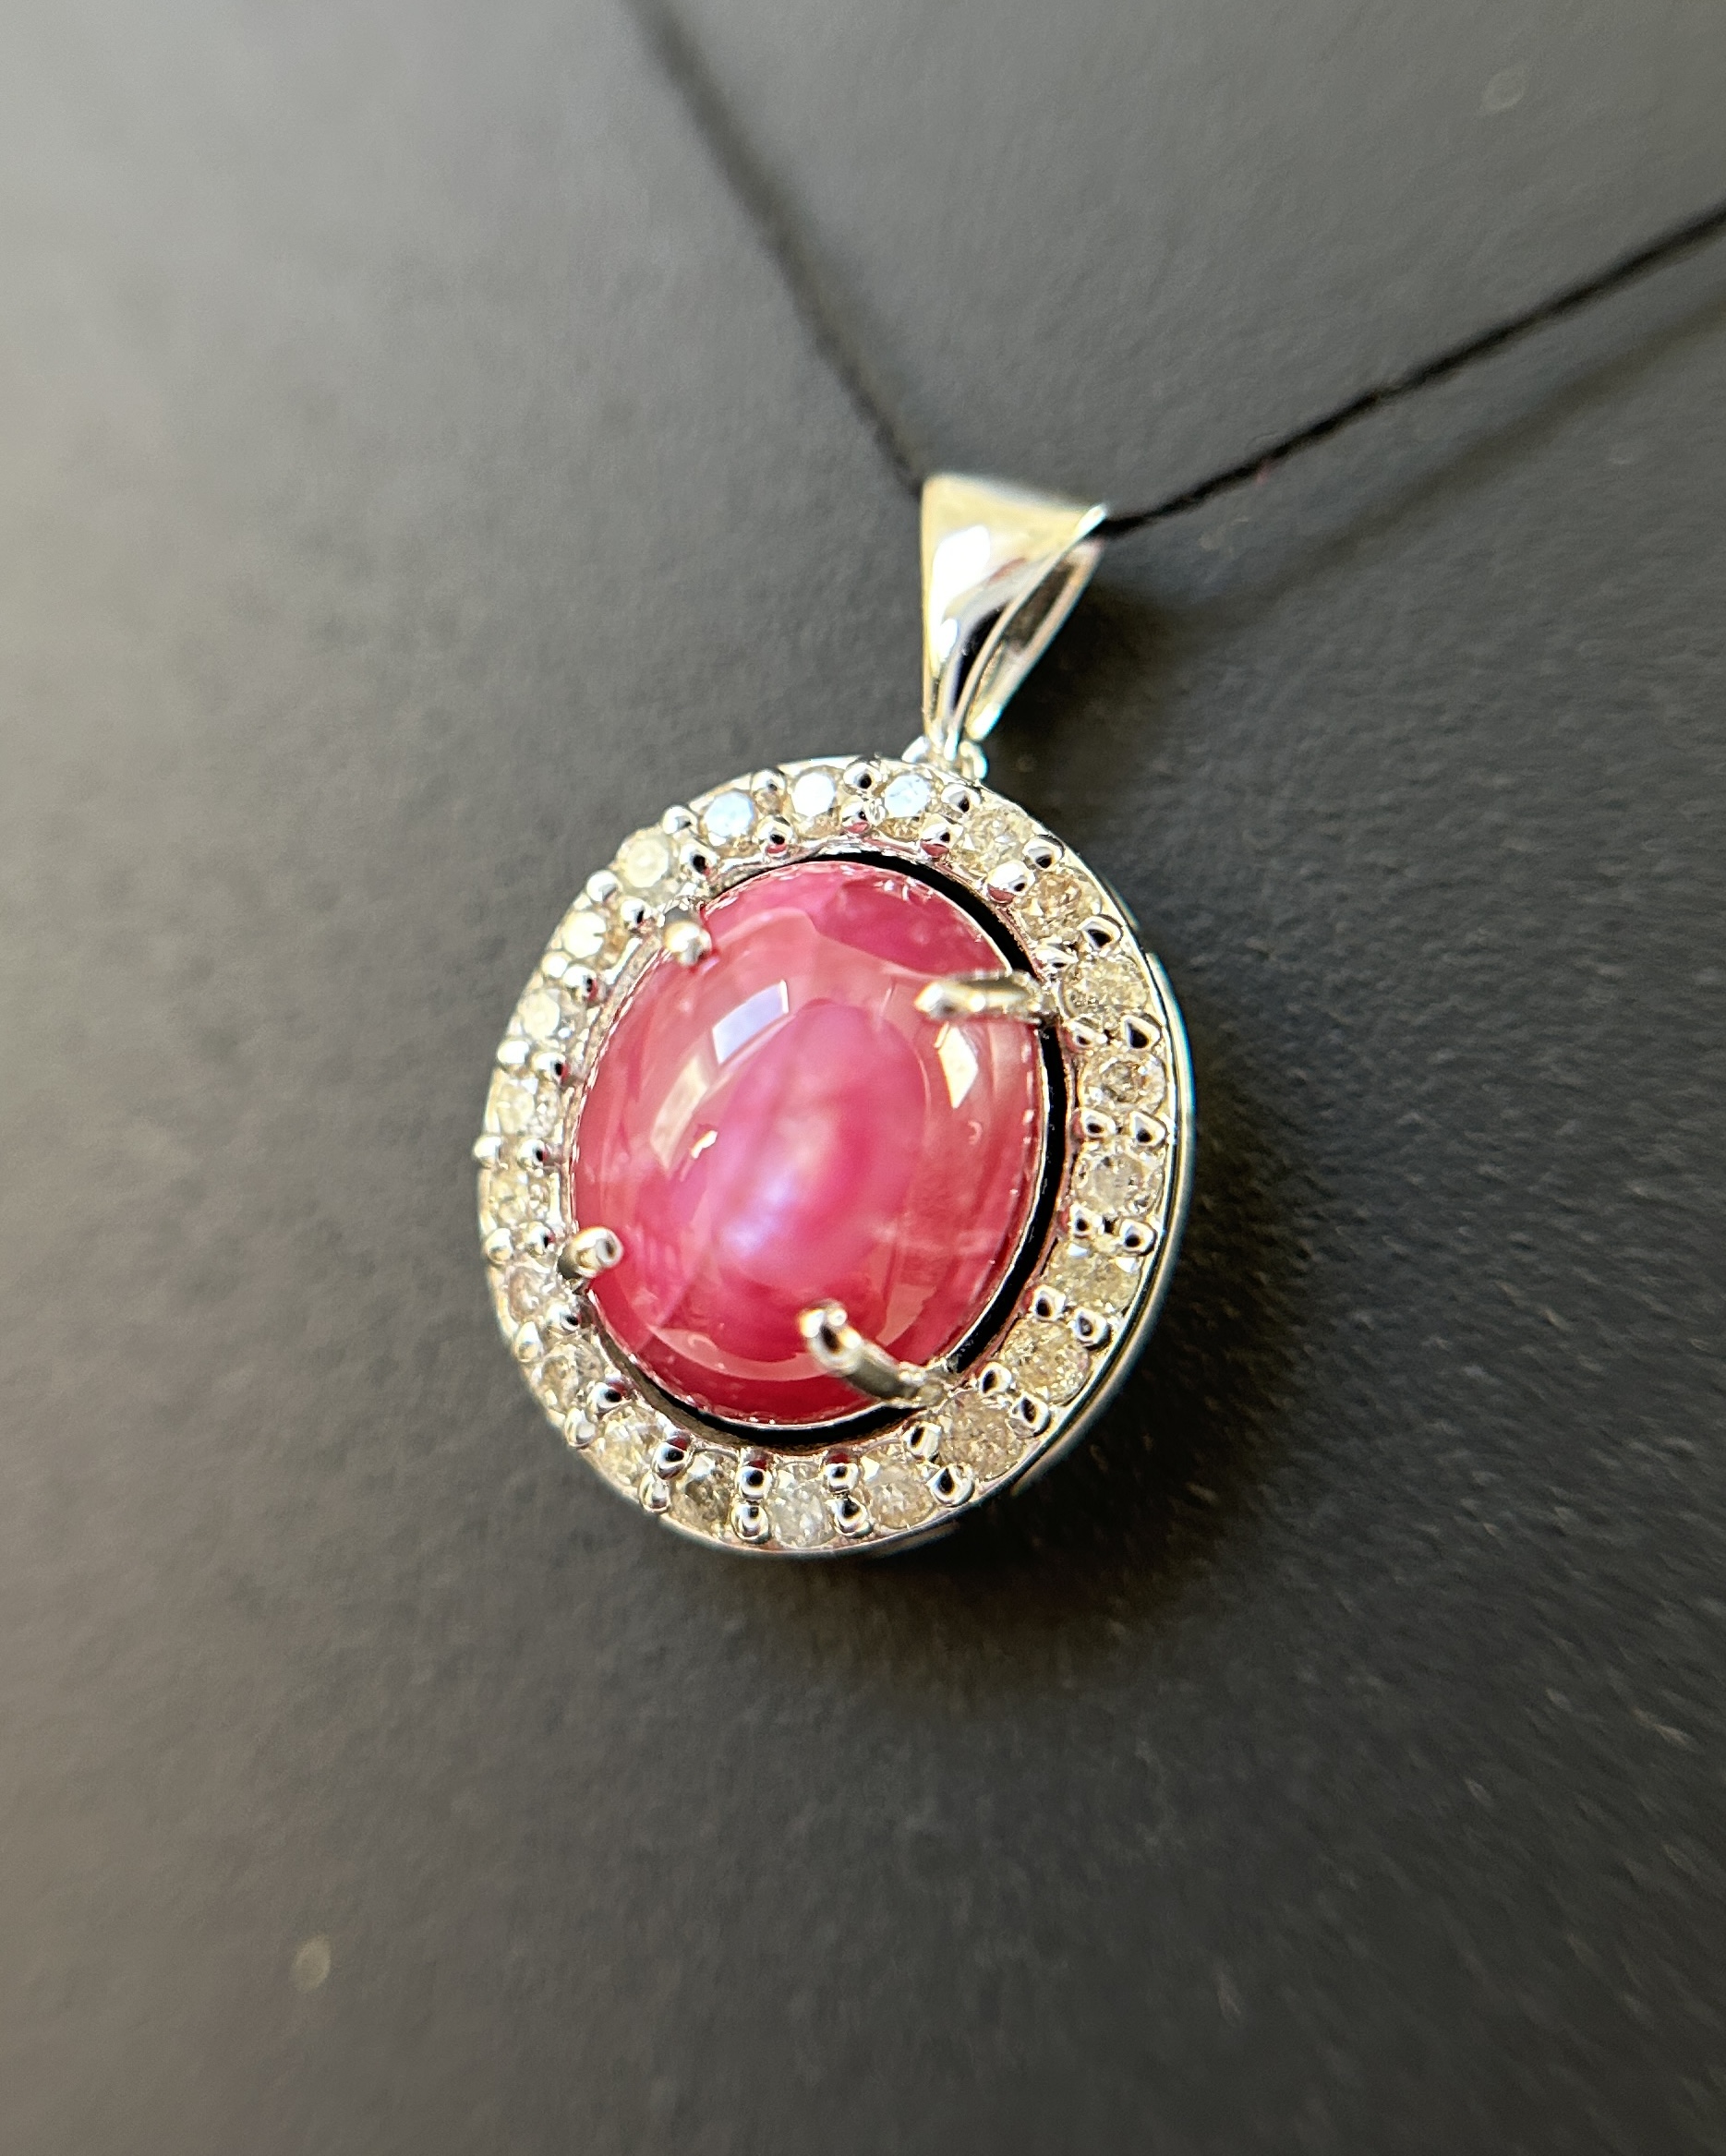 Beautiful Natural Star Ruby Pendant 2.35Ct With Natural Diamonds & 18k Gold - Image 8 of 10